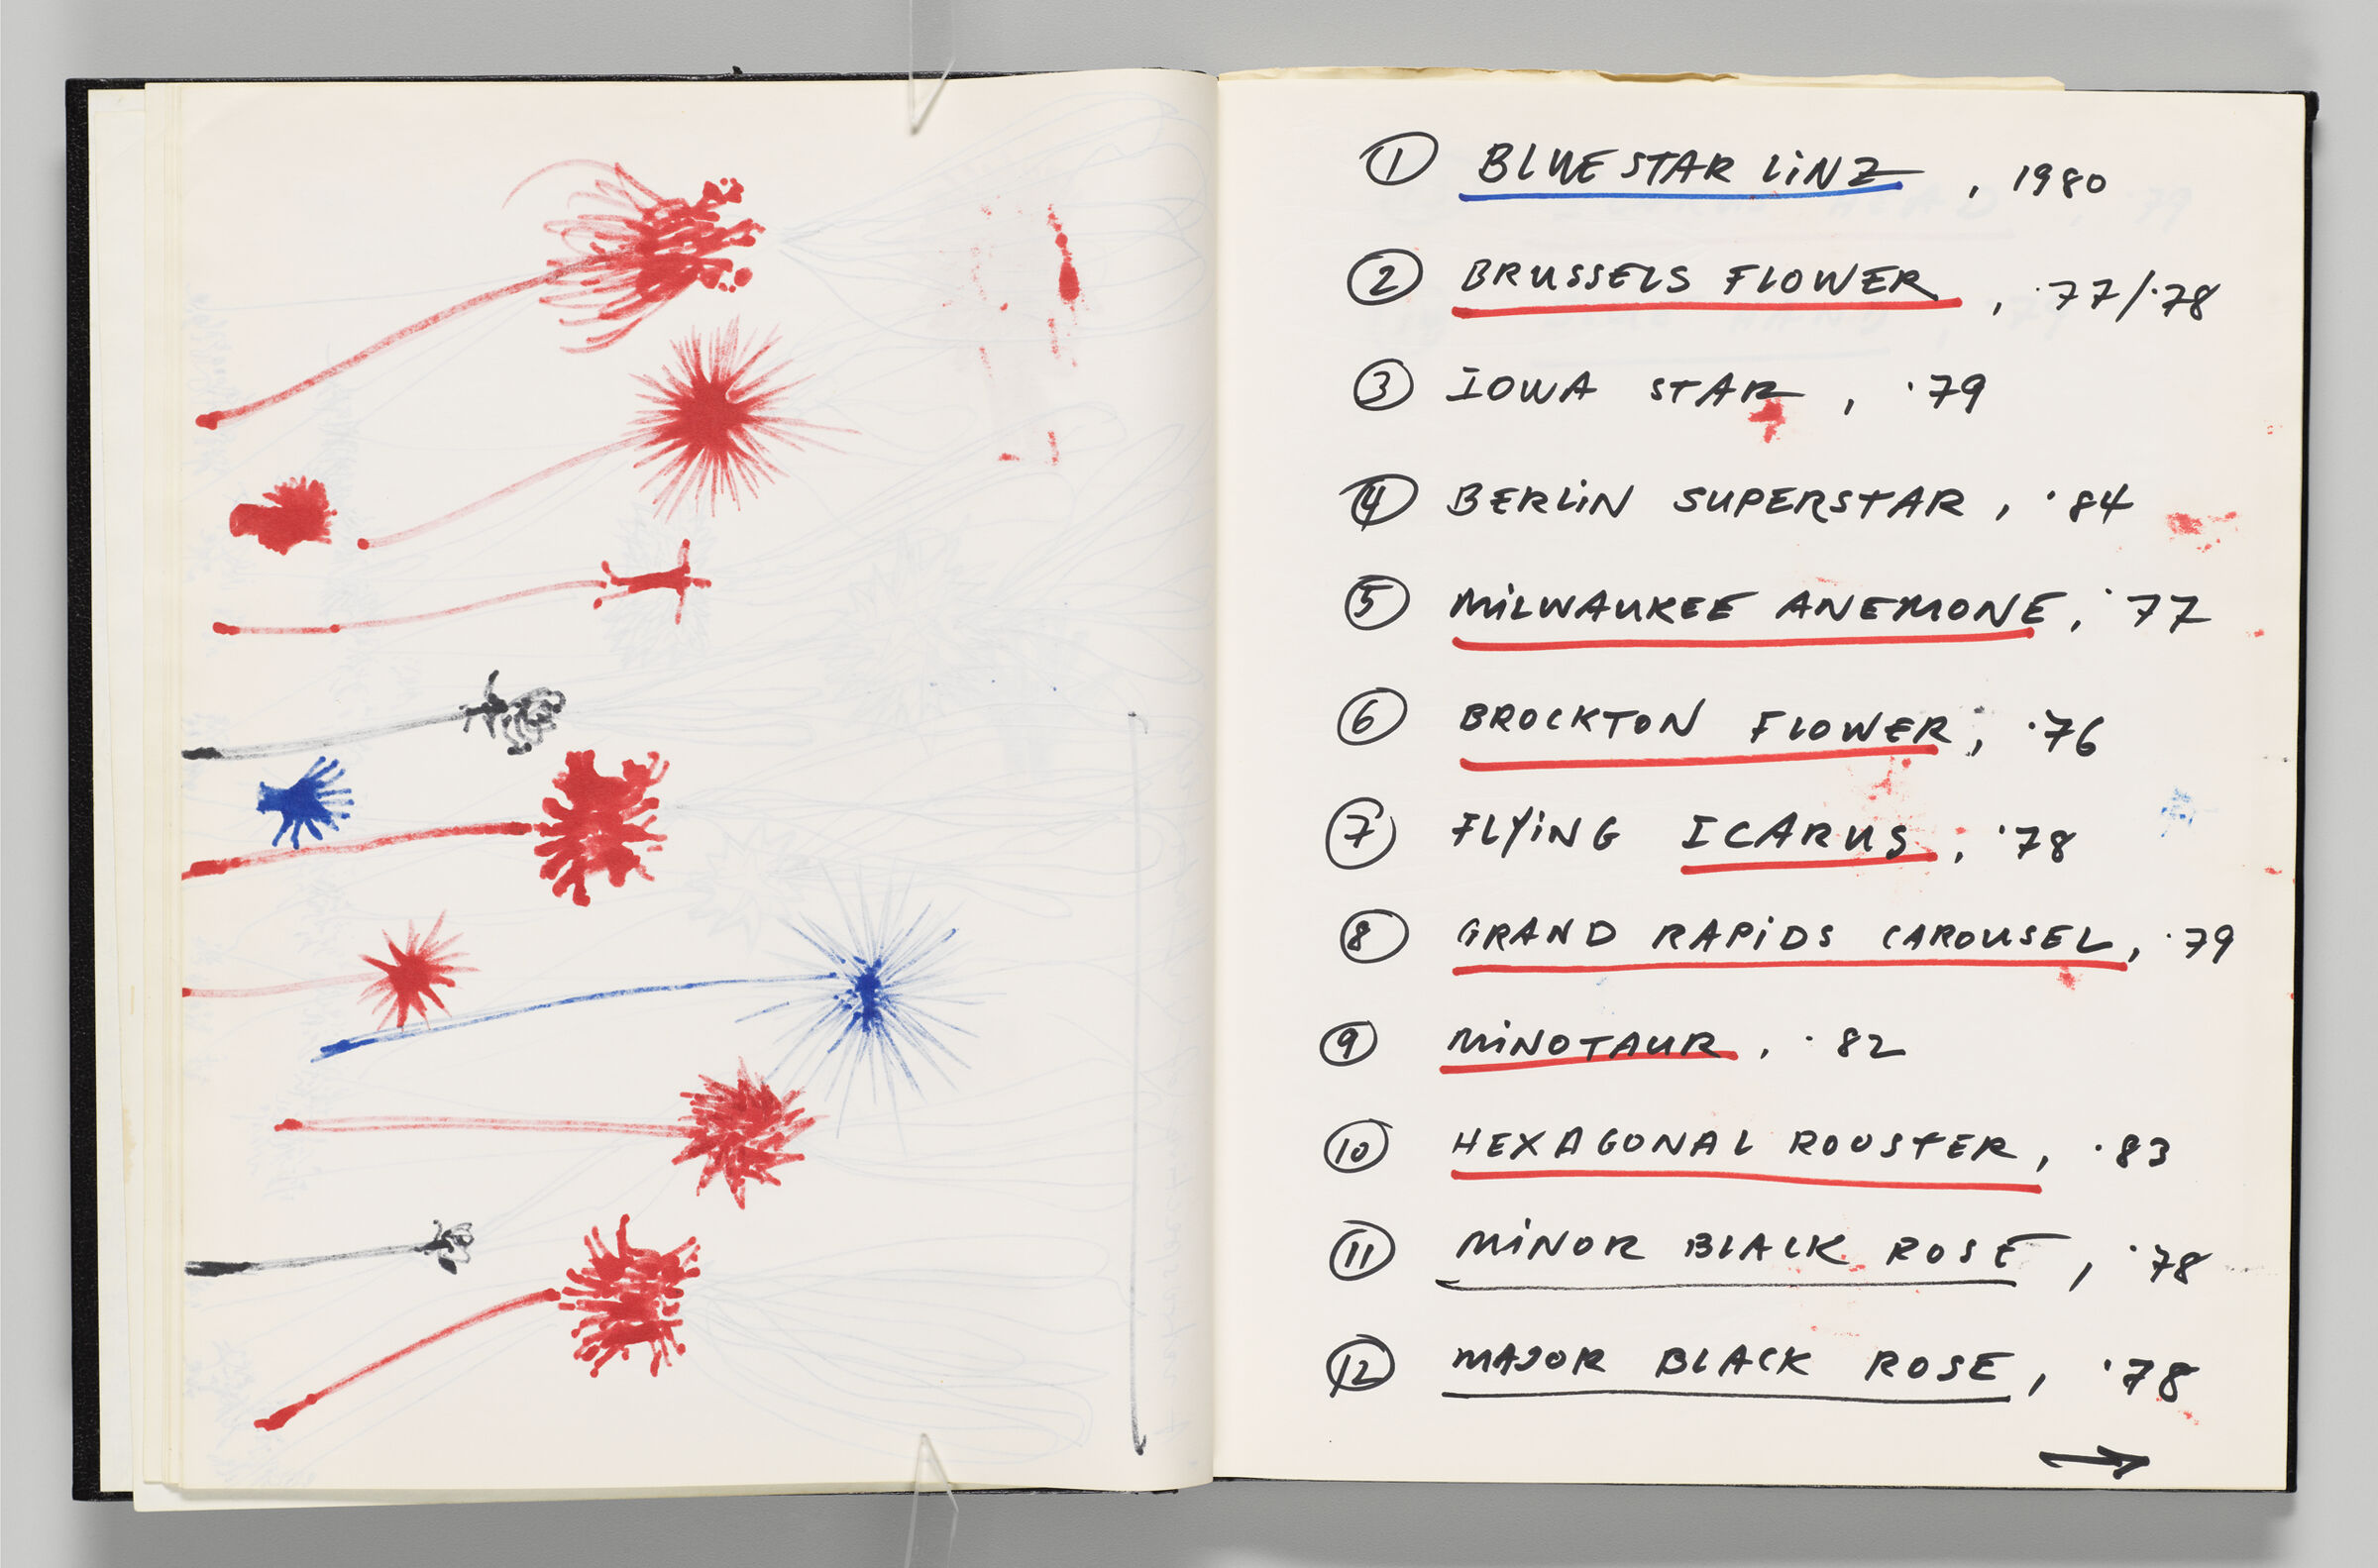 Untitled (Bleed-Through Of Previous Page, Left Page); Untitled (List Of Inflatables, Right Page)